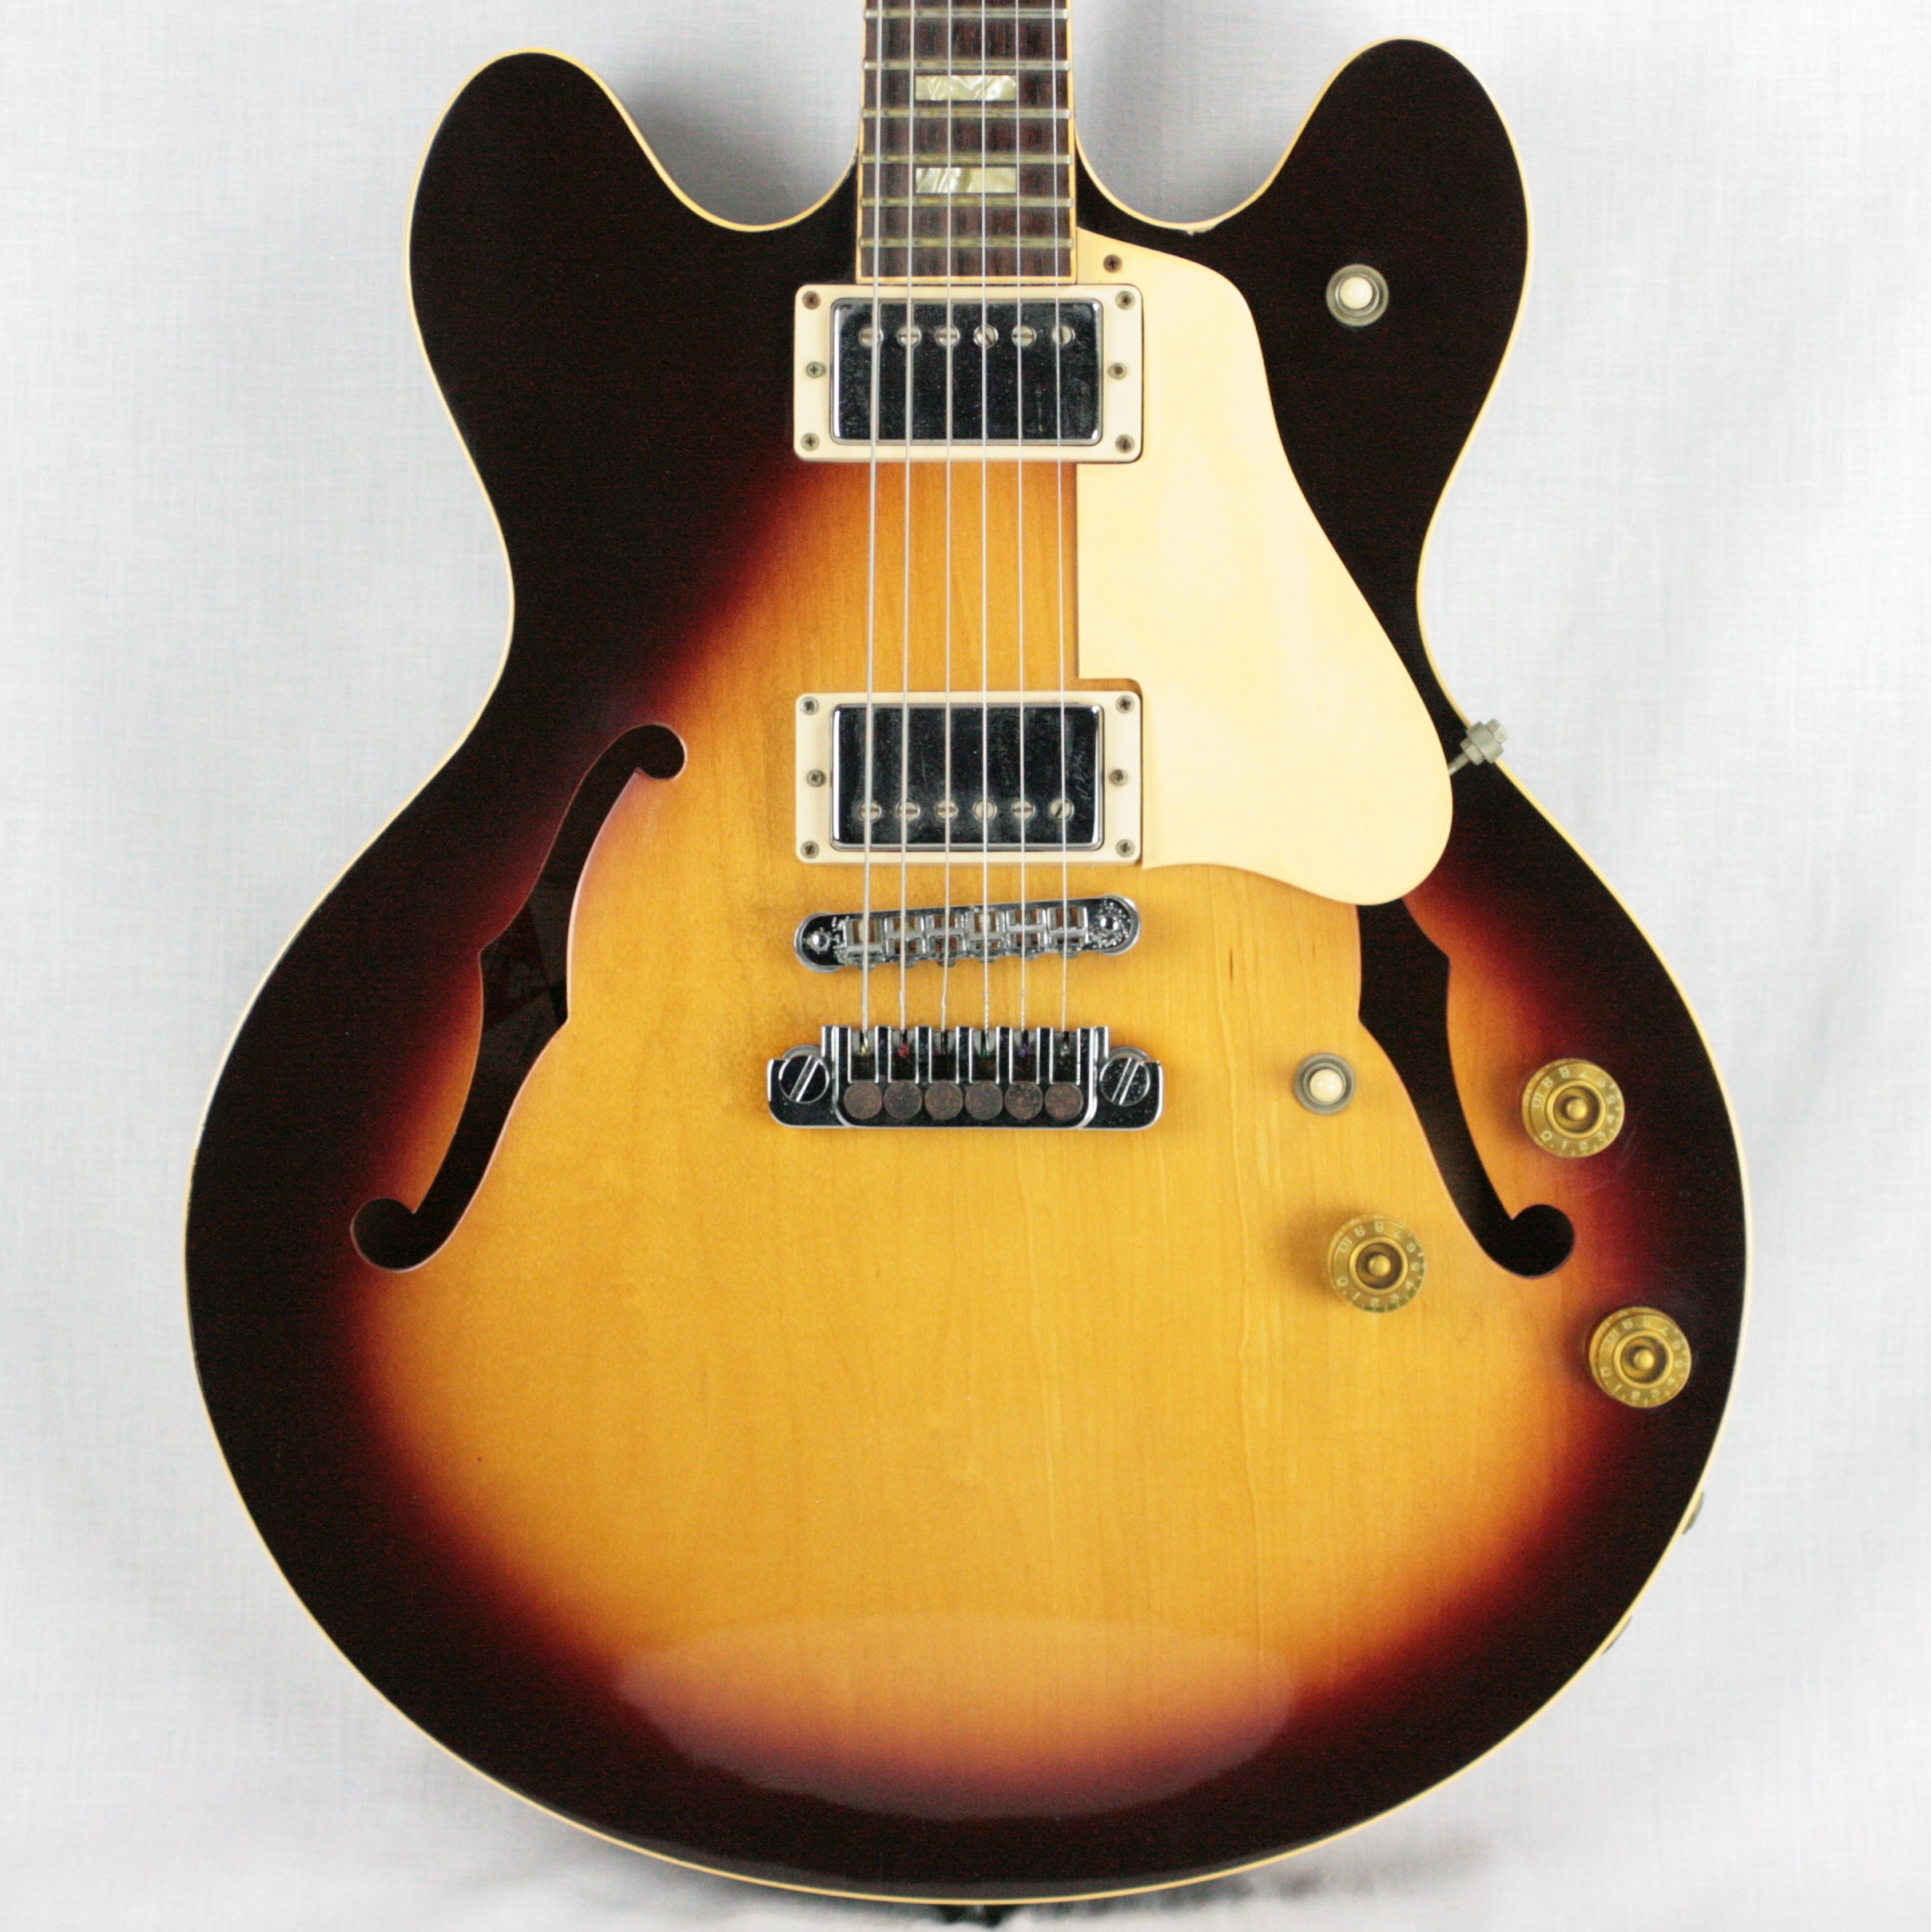 RARE 1979 Gibson ES-335 CRS Country Rock Stereo Tobacco Sunburst! 335 345 355 vintage